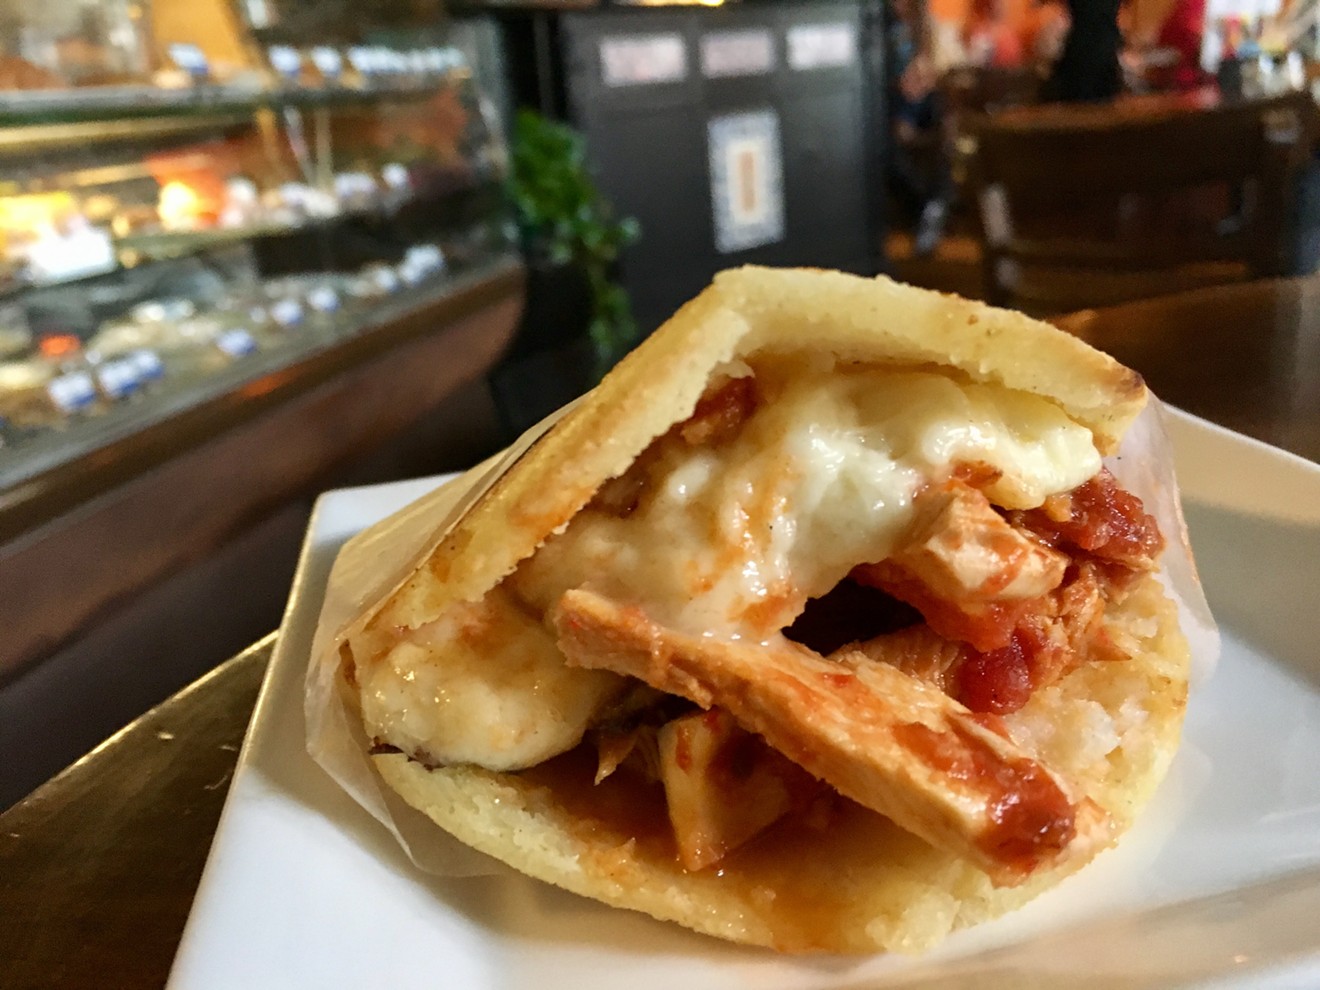 A chicken and cheese arepa — a savory corn turnover — is $7.95.